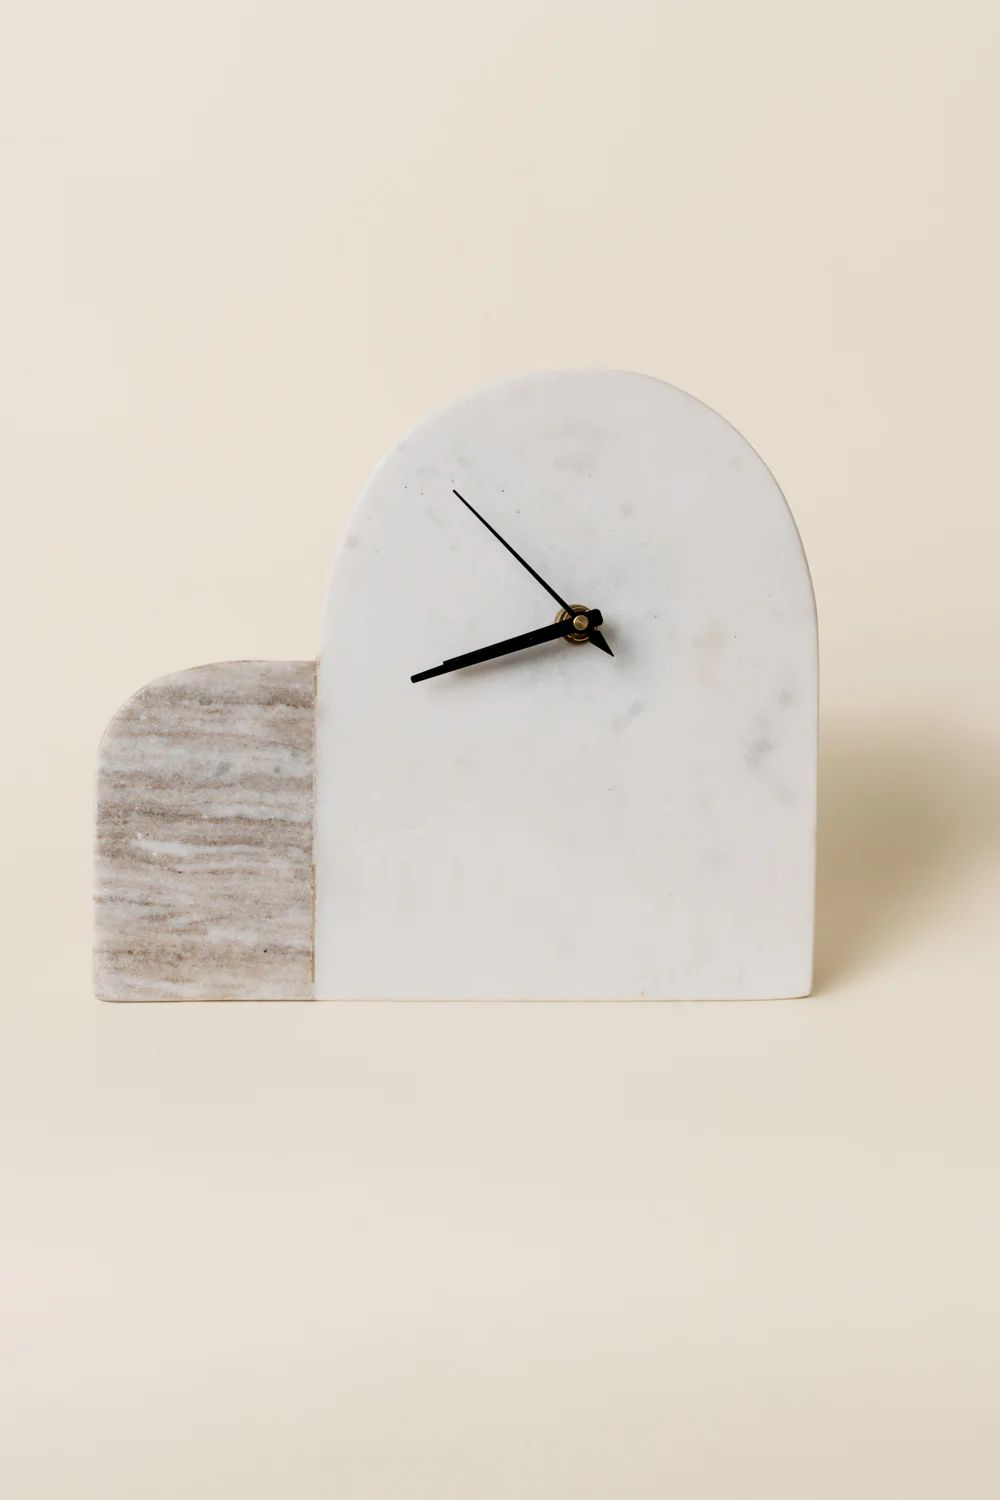 Two-Tone Arched Marble Mantel Clock | Joy Meets Home